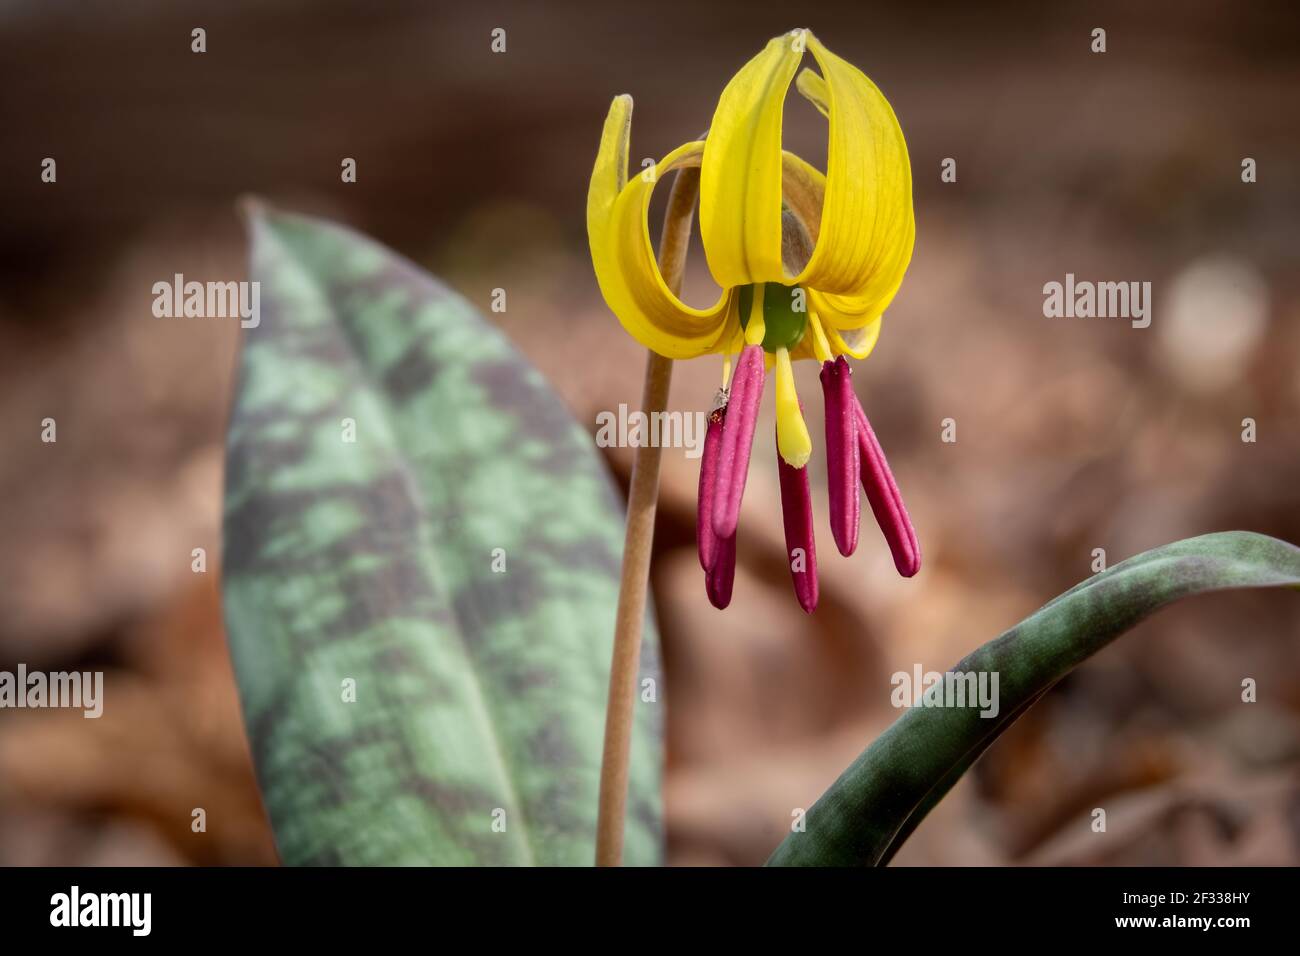 The Dimpled Trout Lily (Erythronium umbilicatum) is a native ephemeral species in the Southeast United States. Stock Photo